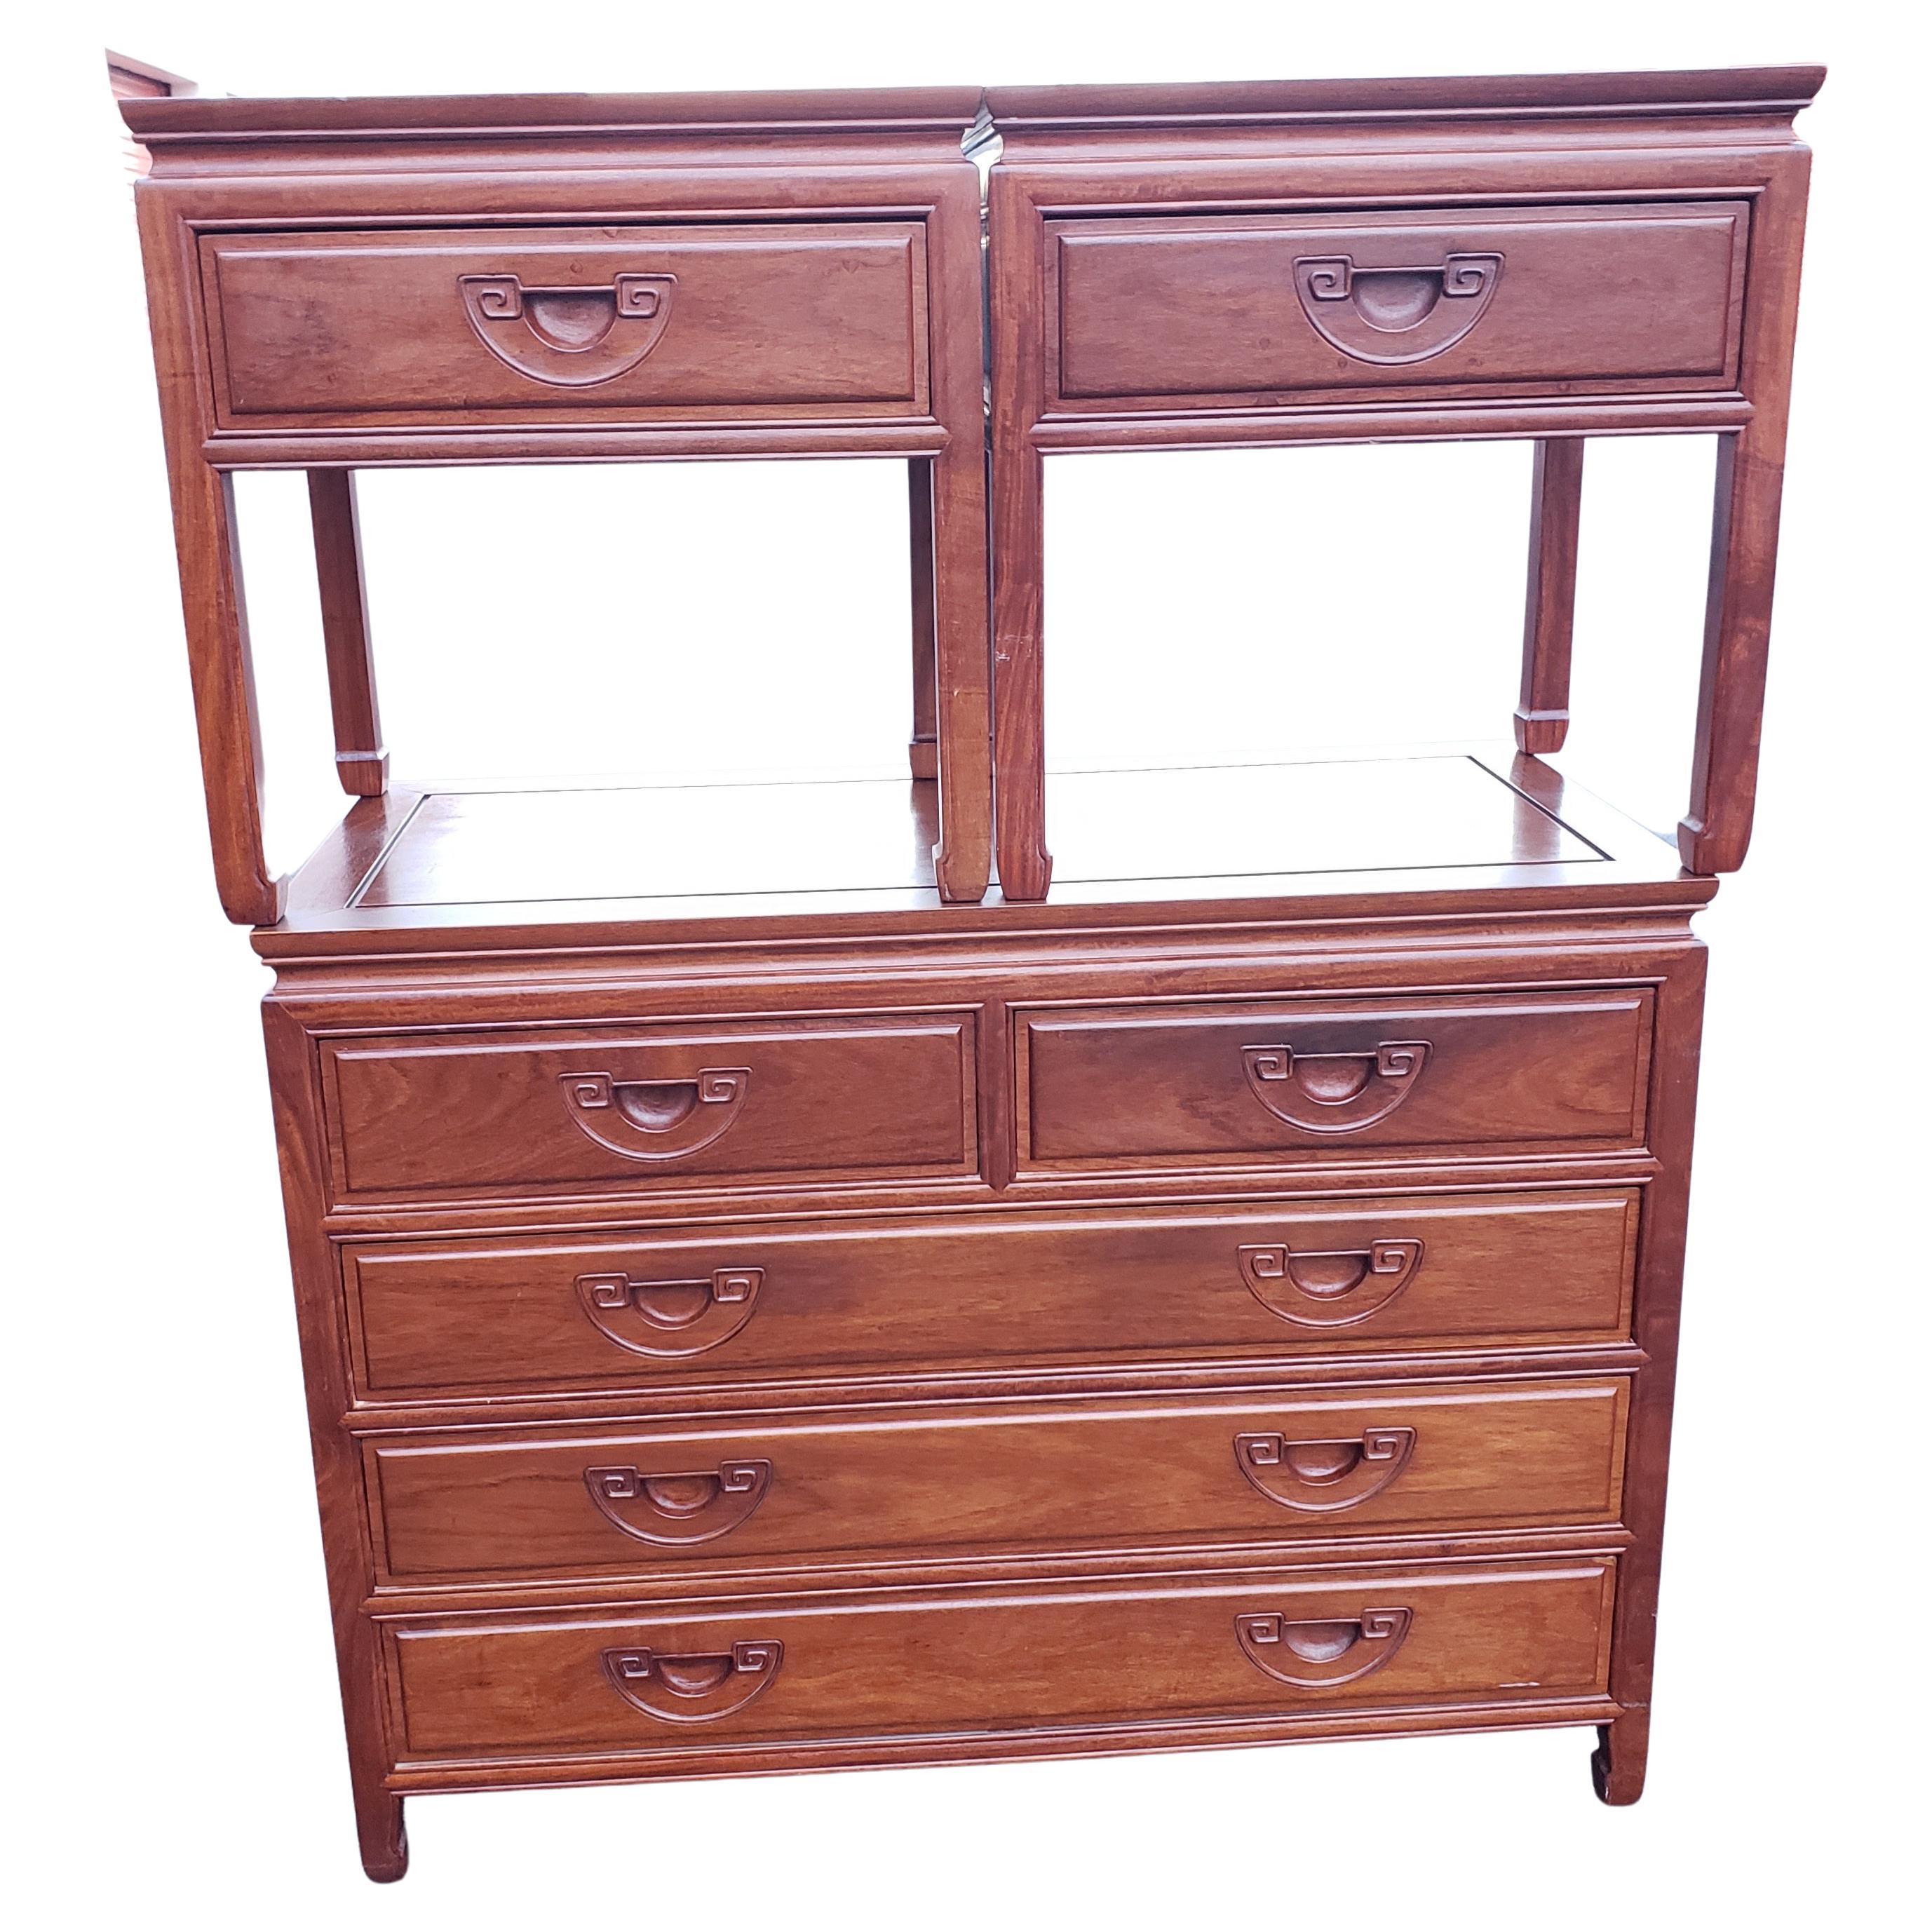 George Zee Rosewood Hand Crafted Chest of Drawers and Side Tables, a Set